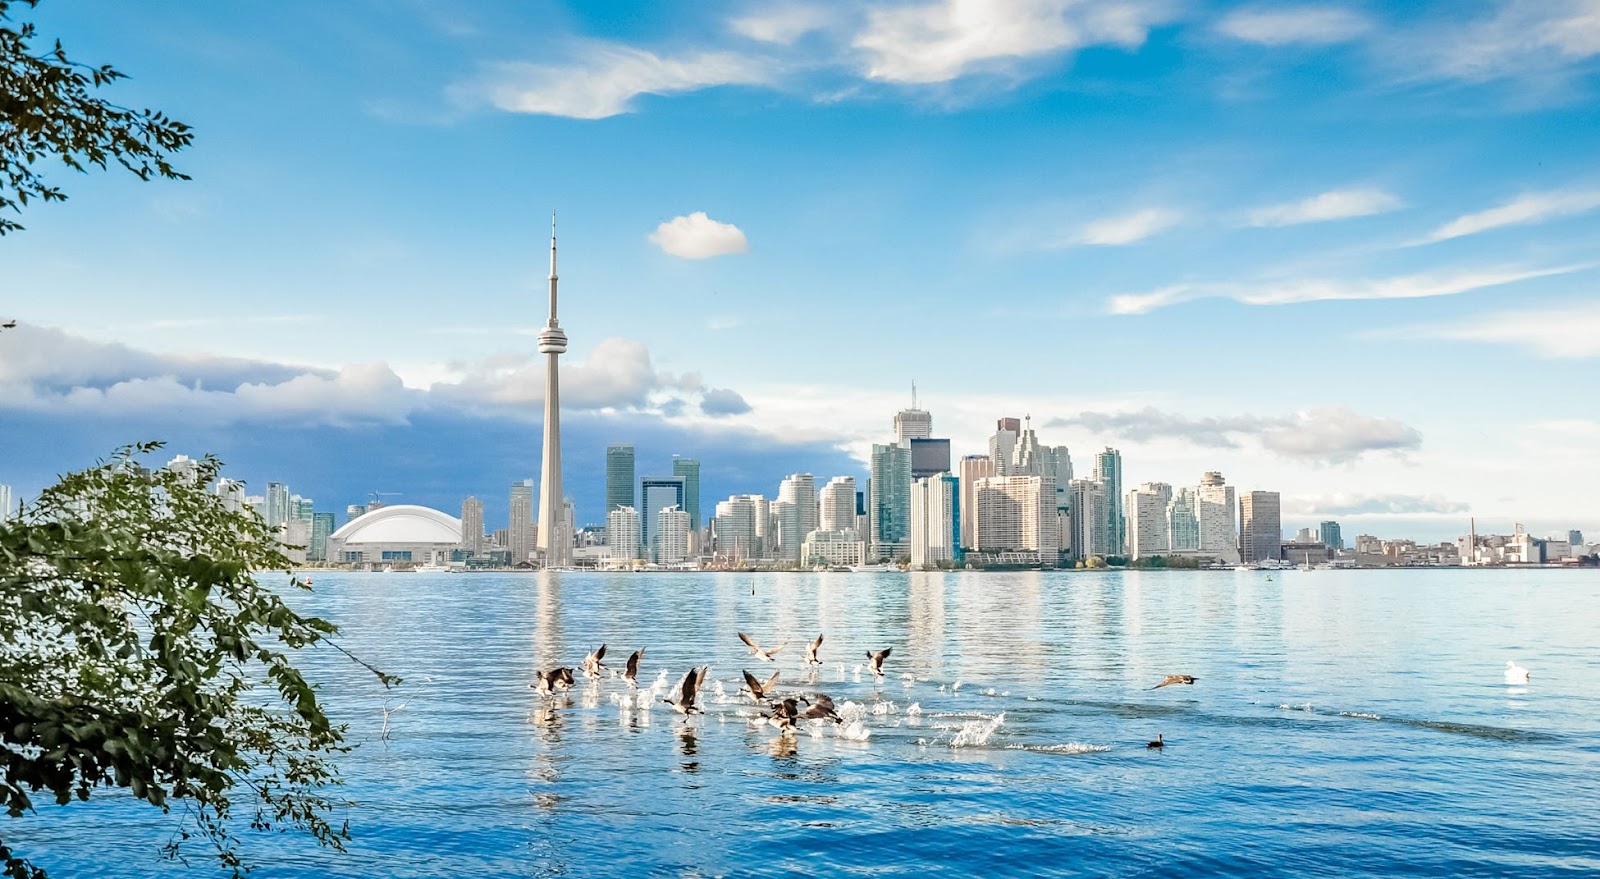 Birds taking flight from the water with Toronto in the background